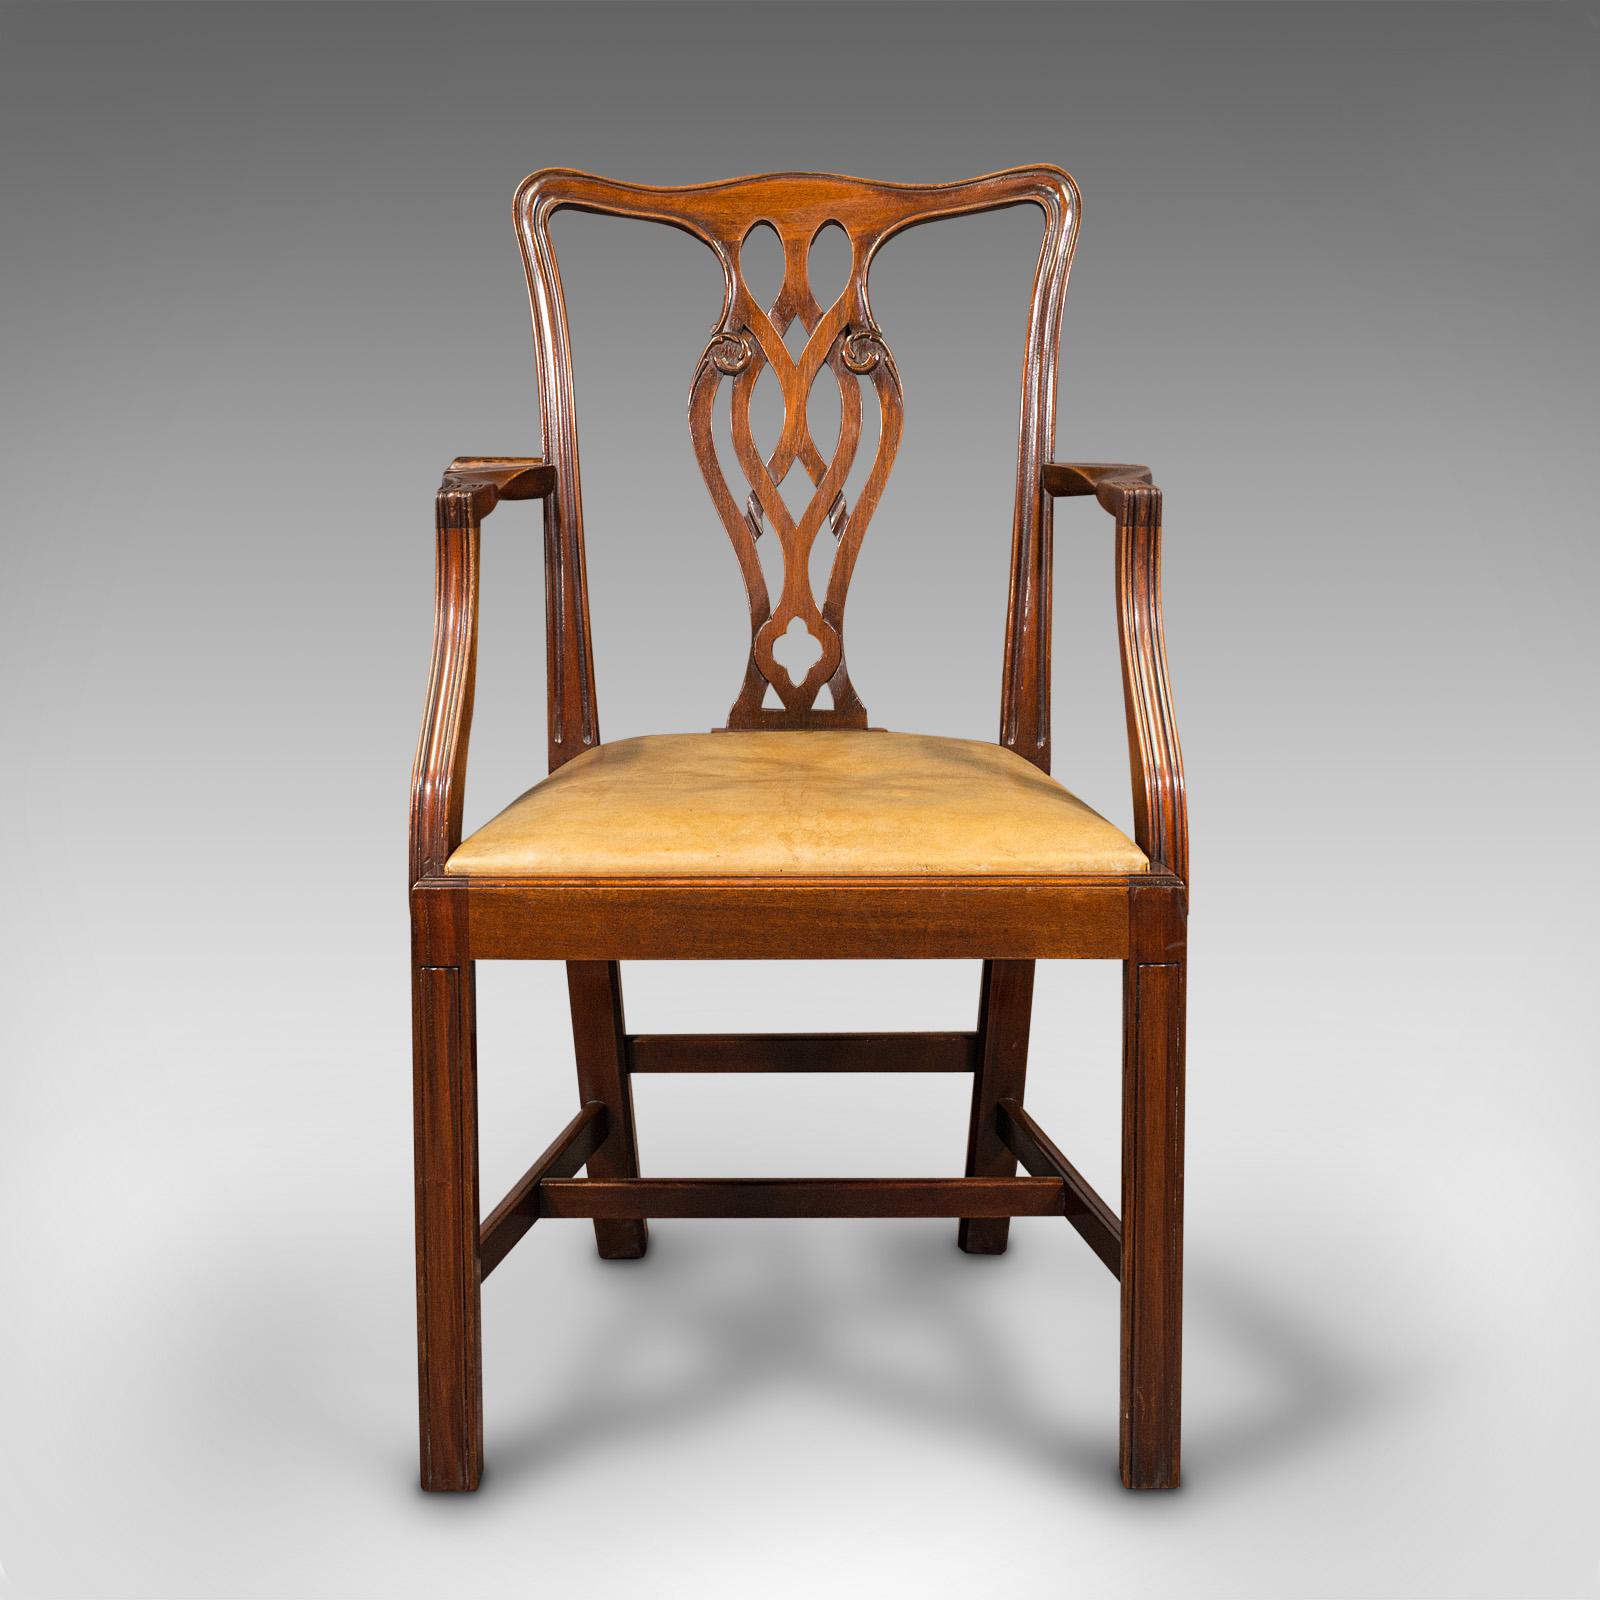 This is a long set of 10, leather seated antique carver dining chairs. An English, mahogany elbow seat with Chippendale revival taste, dating to the late Victorian period, circa 1900.

Superb suite of ten carver chairs for the grandest of dining